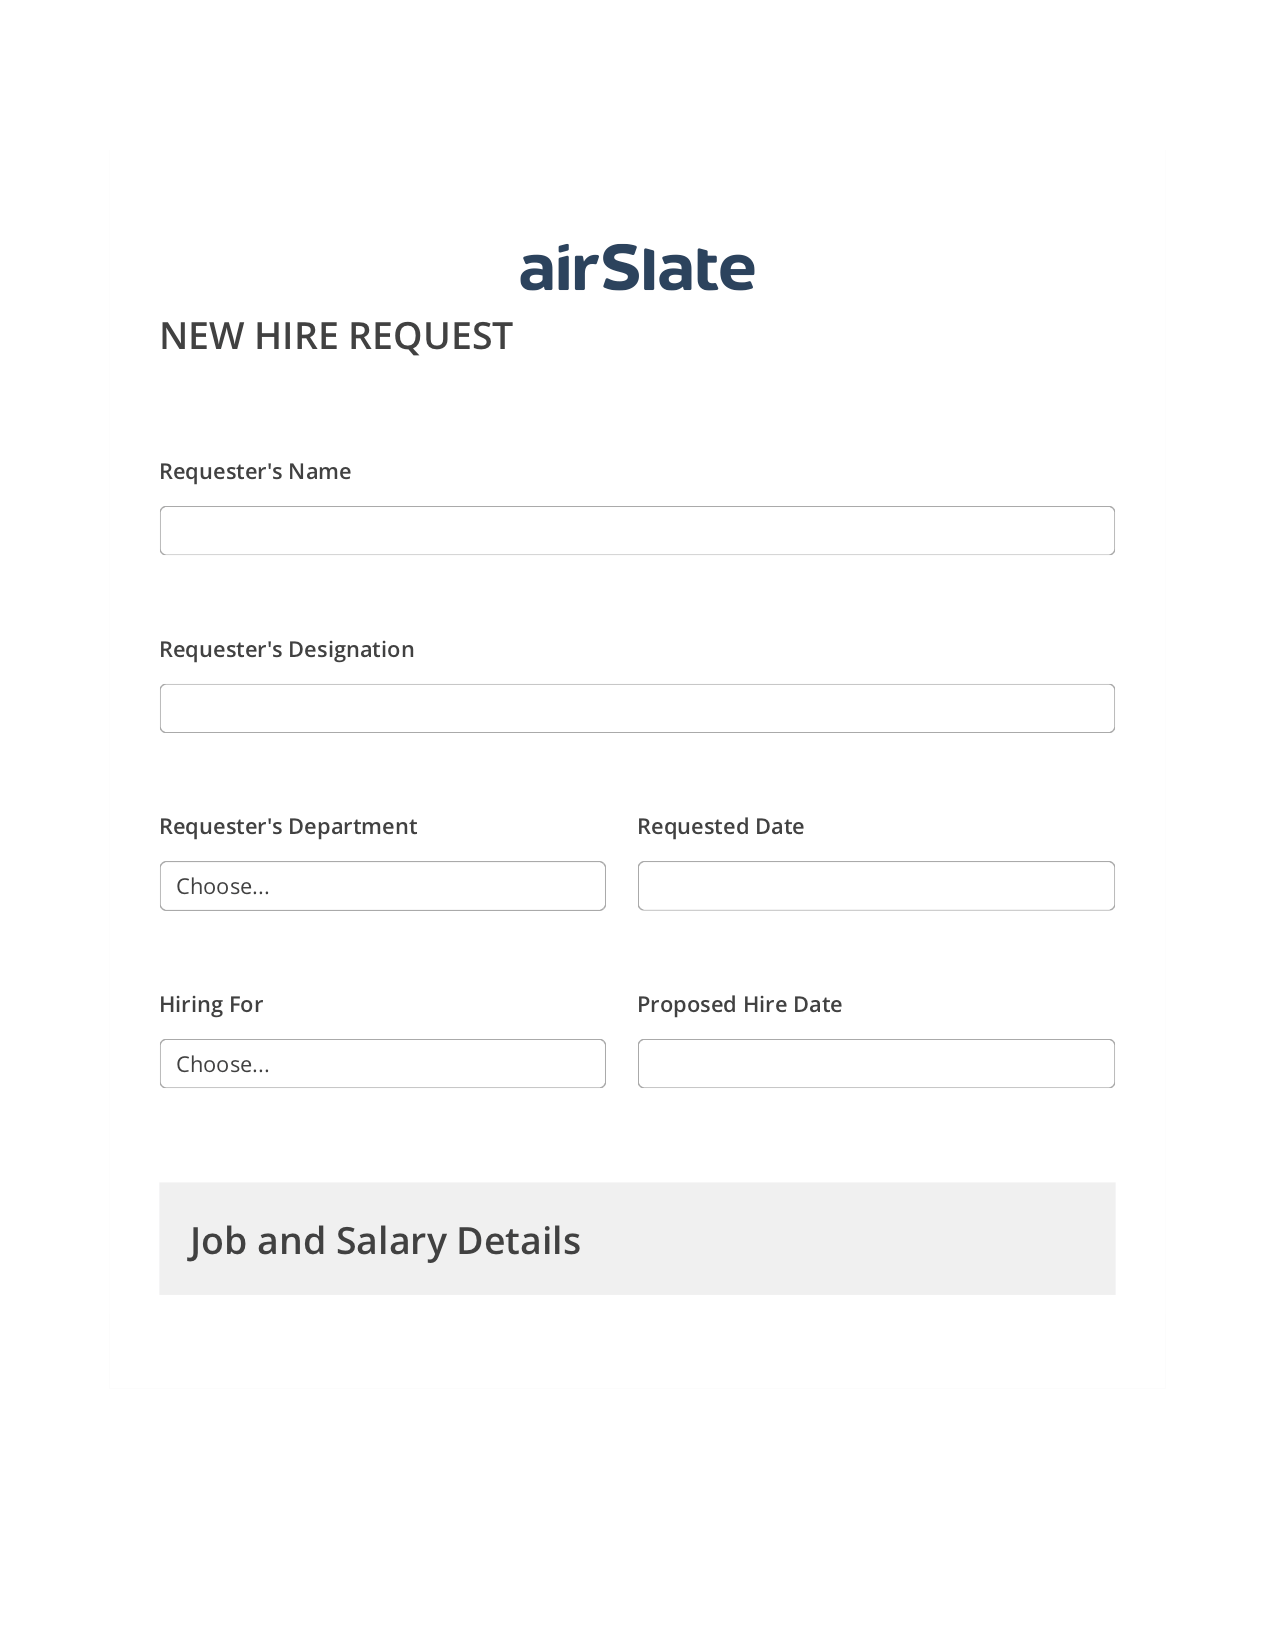 Hiring Request Workflow Pre-fill from Google Sheets Bot, Google Sheet Two-Way Binding Bot, Archive to OneDrive Bot